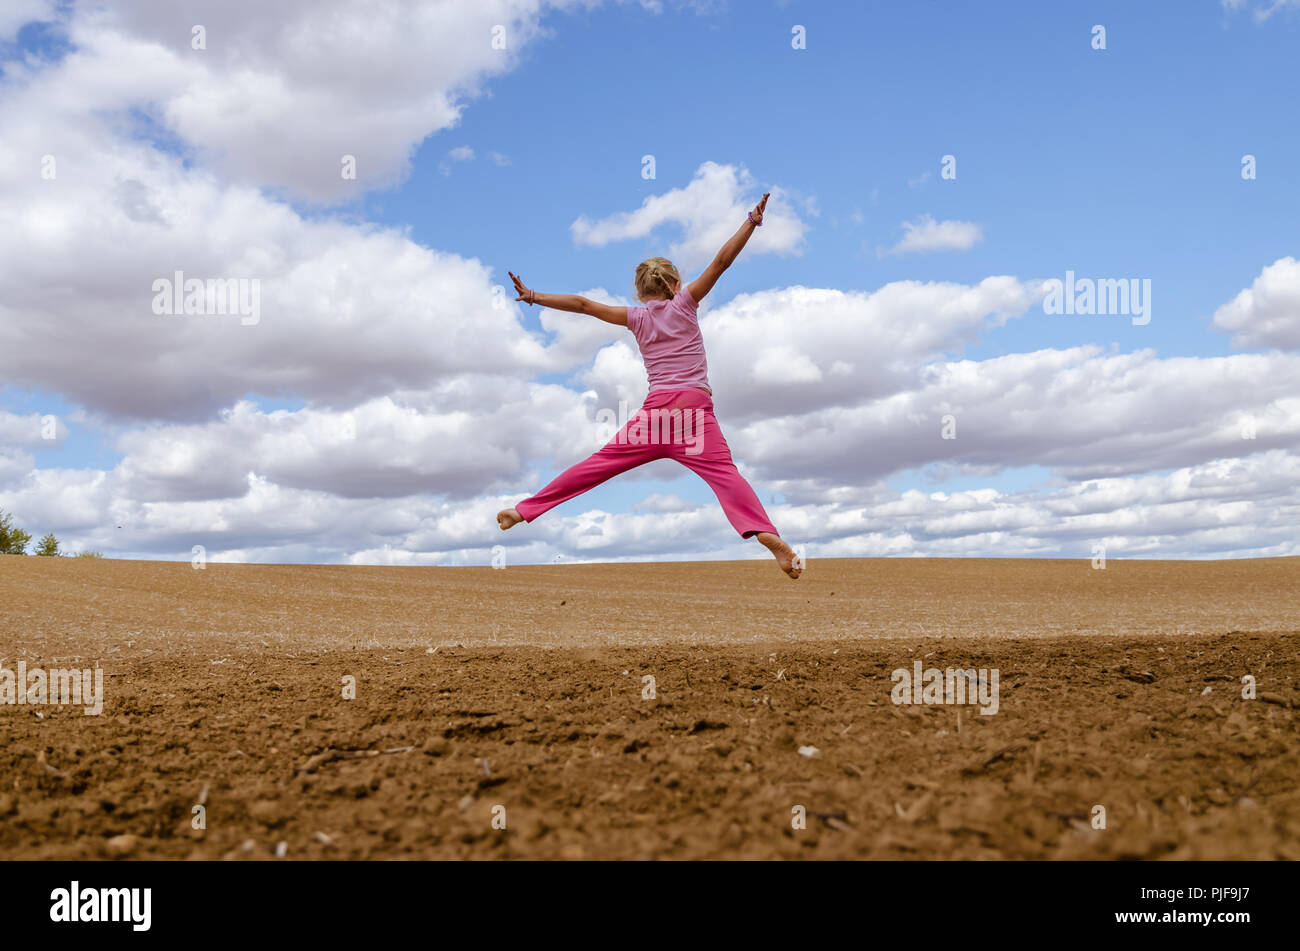 little child jumping alone in country in scenic countryside with beautiful clouds and blue sky Stock Photo